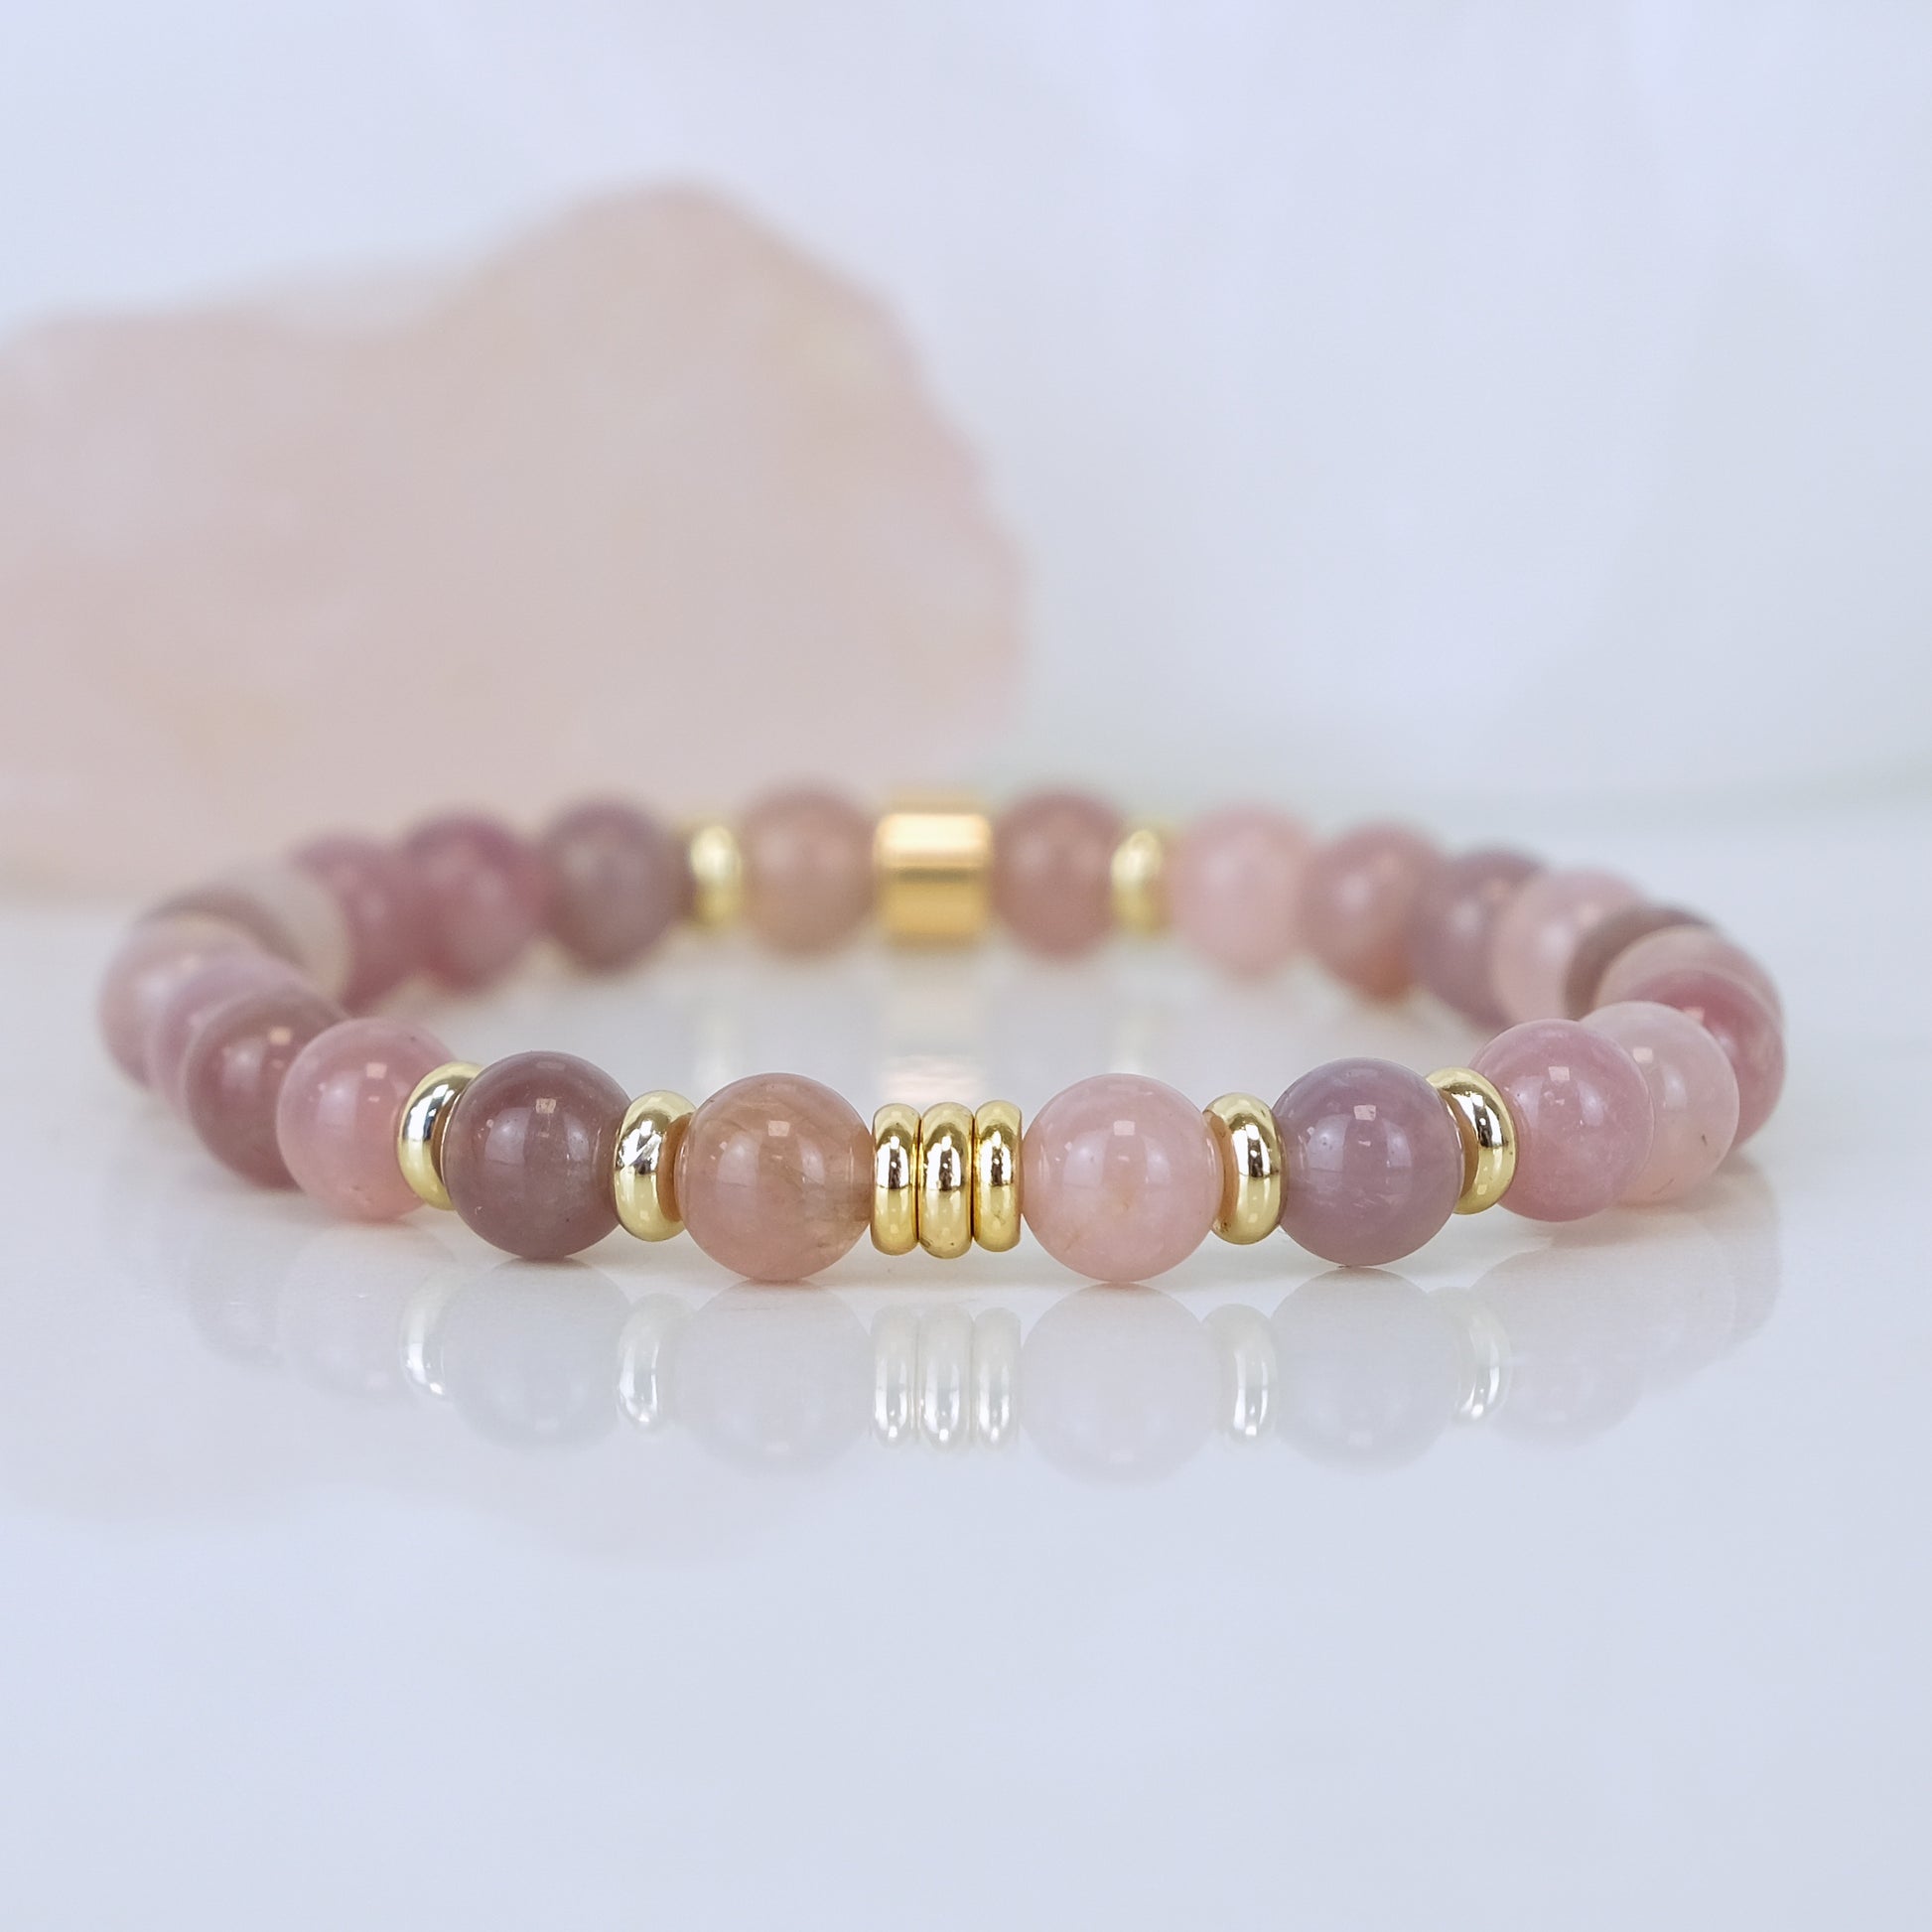 A lavender rose quartz gemstone bracelet in 6mm with gold plated accessories